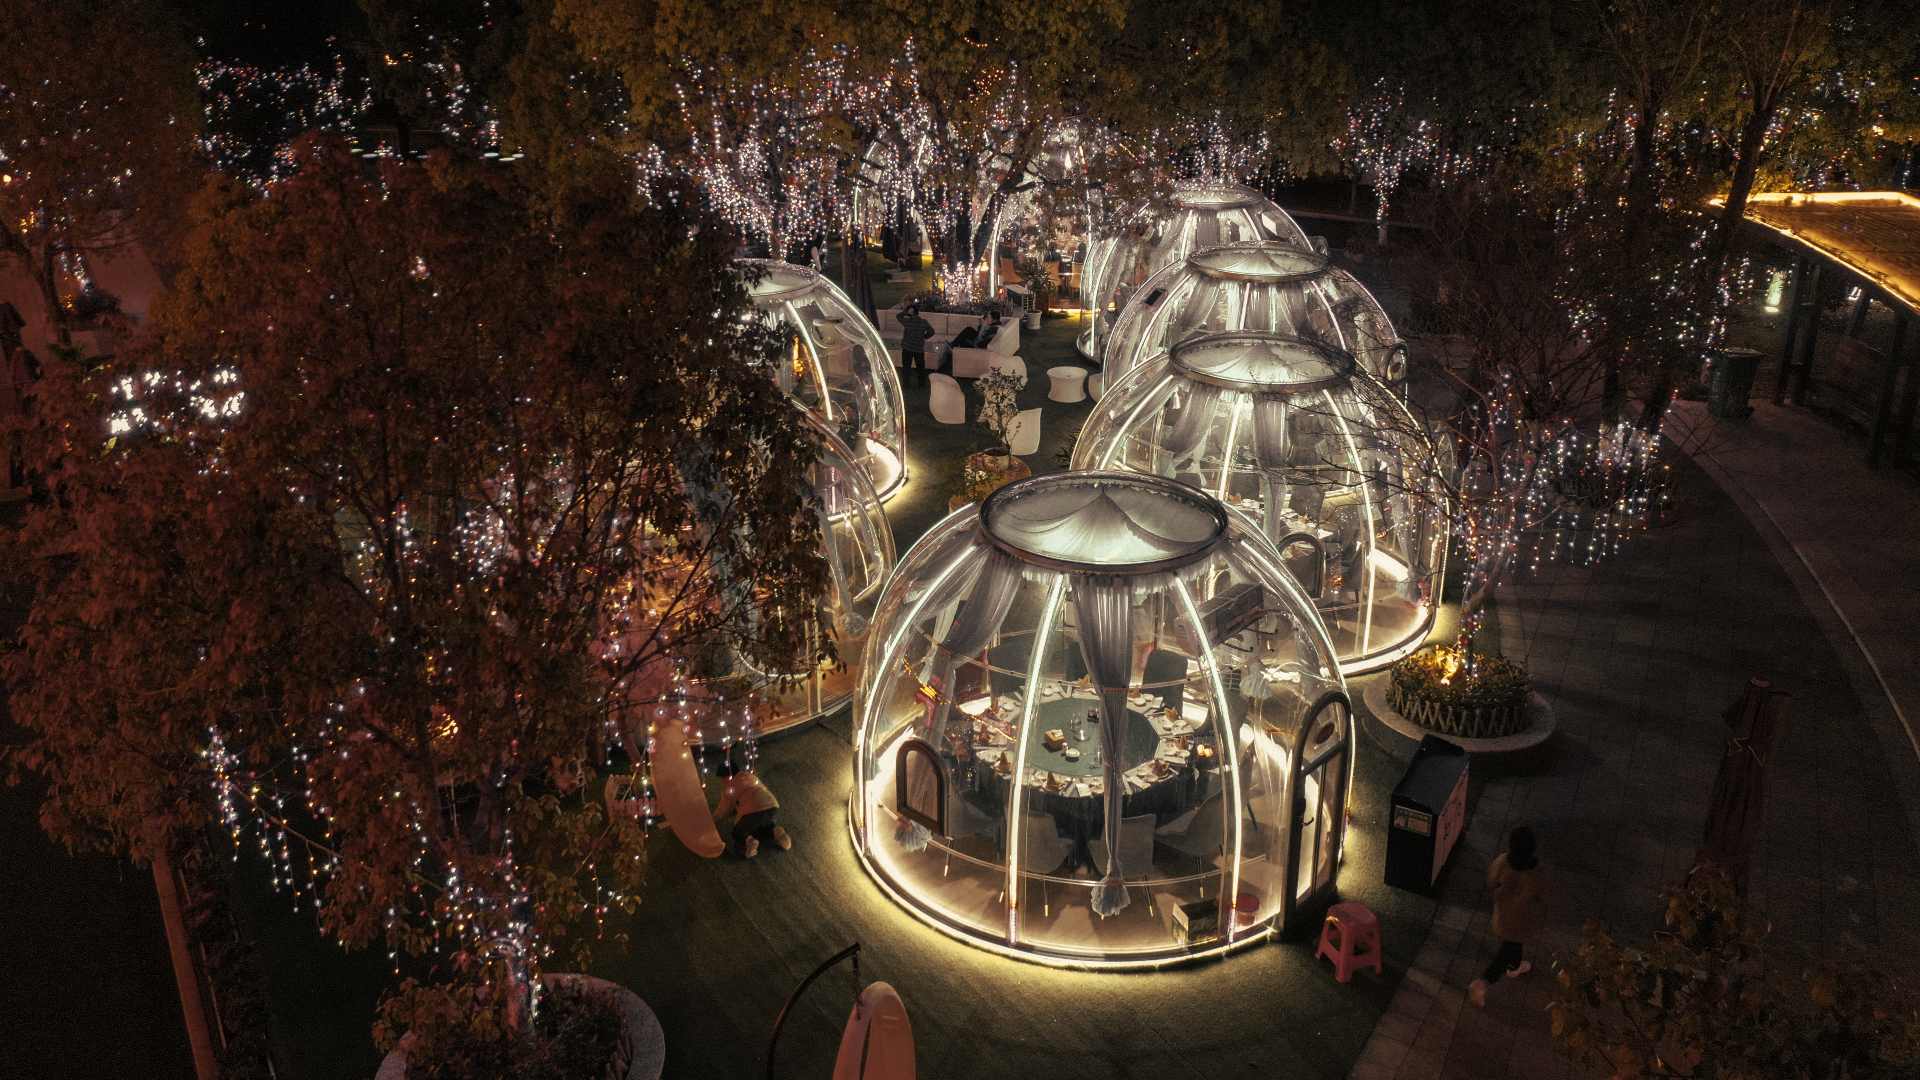 Fed Square's Pop-Up Winter Wonderland Will Have Private Igloos Serving Raclette and Mulled Wine